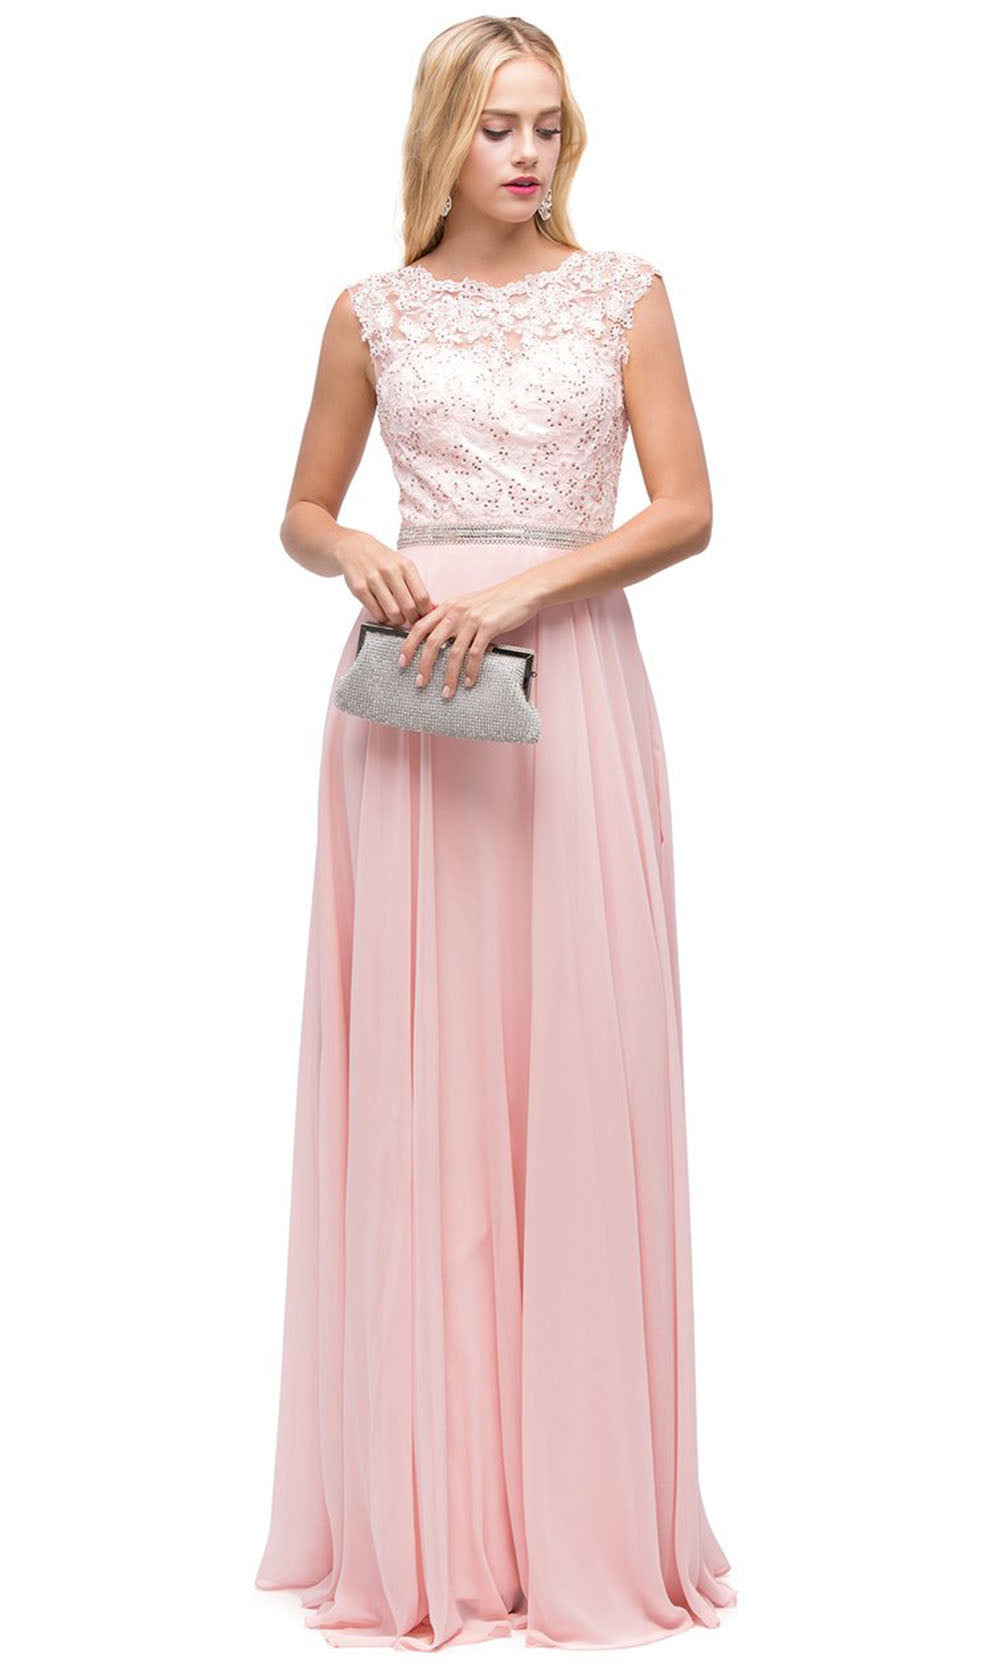 Dancing Queen - 9675 Embroidered Bateau Neck A-Line Gown In Pink